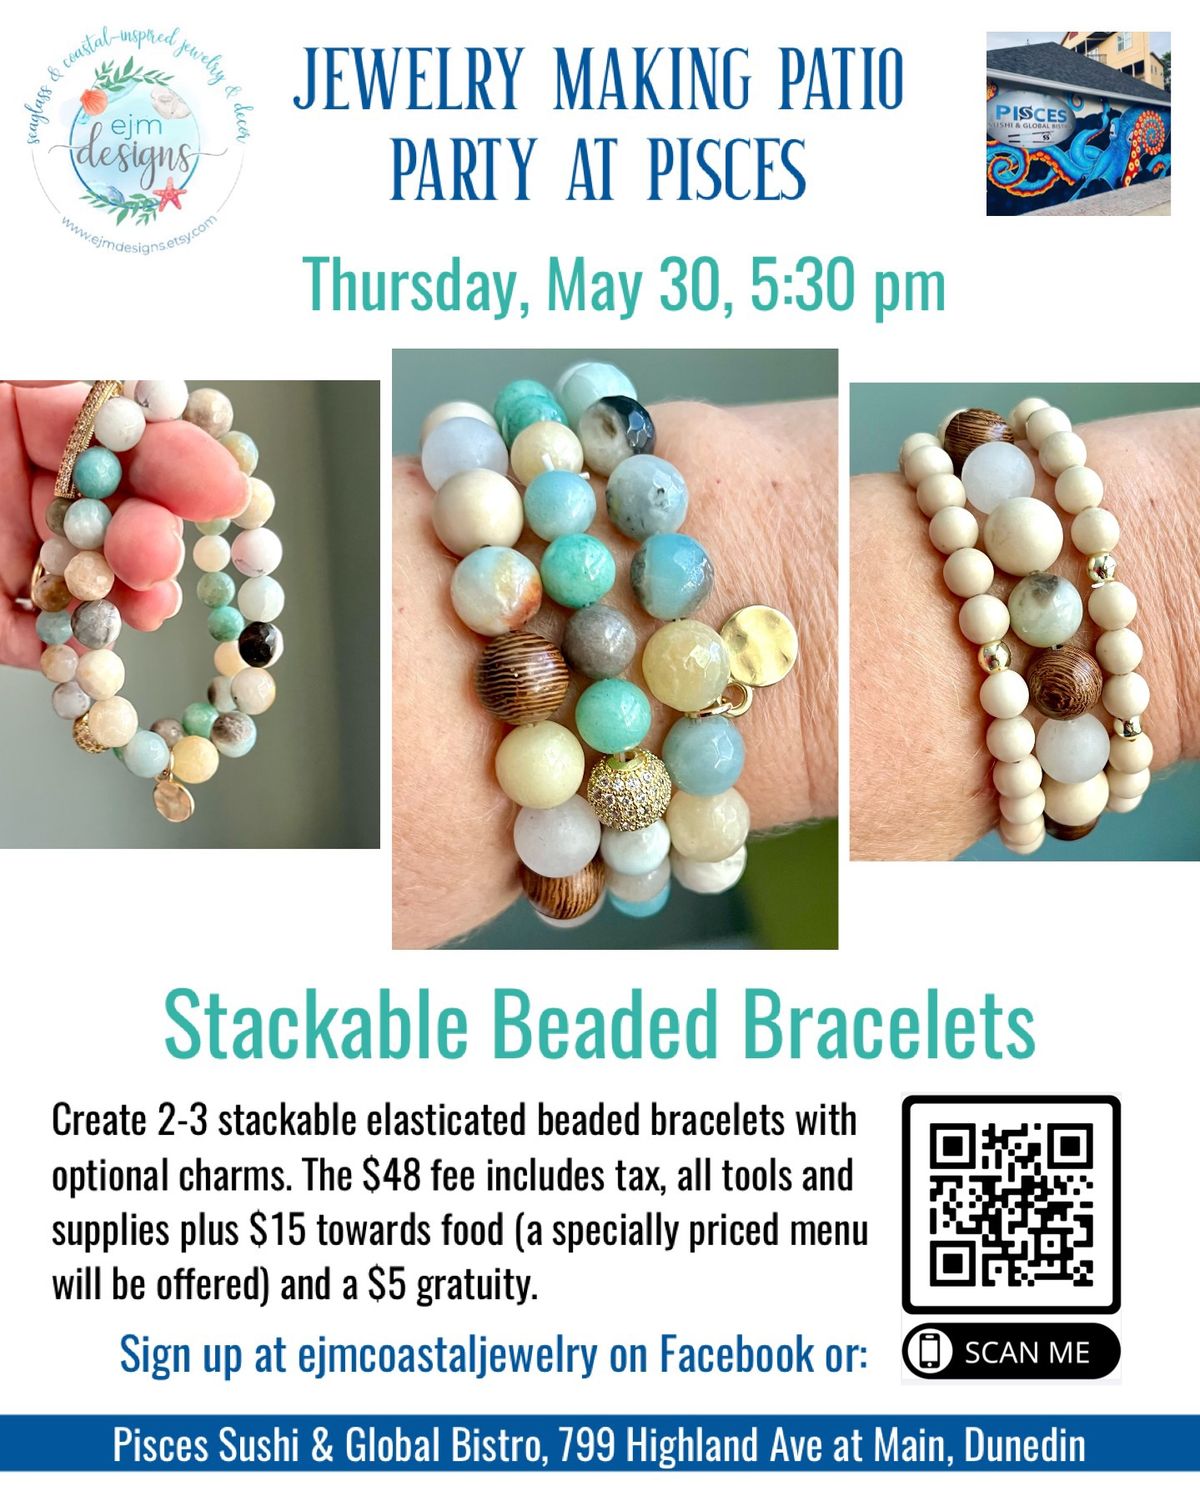 Jewelry Making Party at Pisces - Stackable Bracelets Workshop